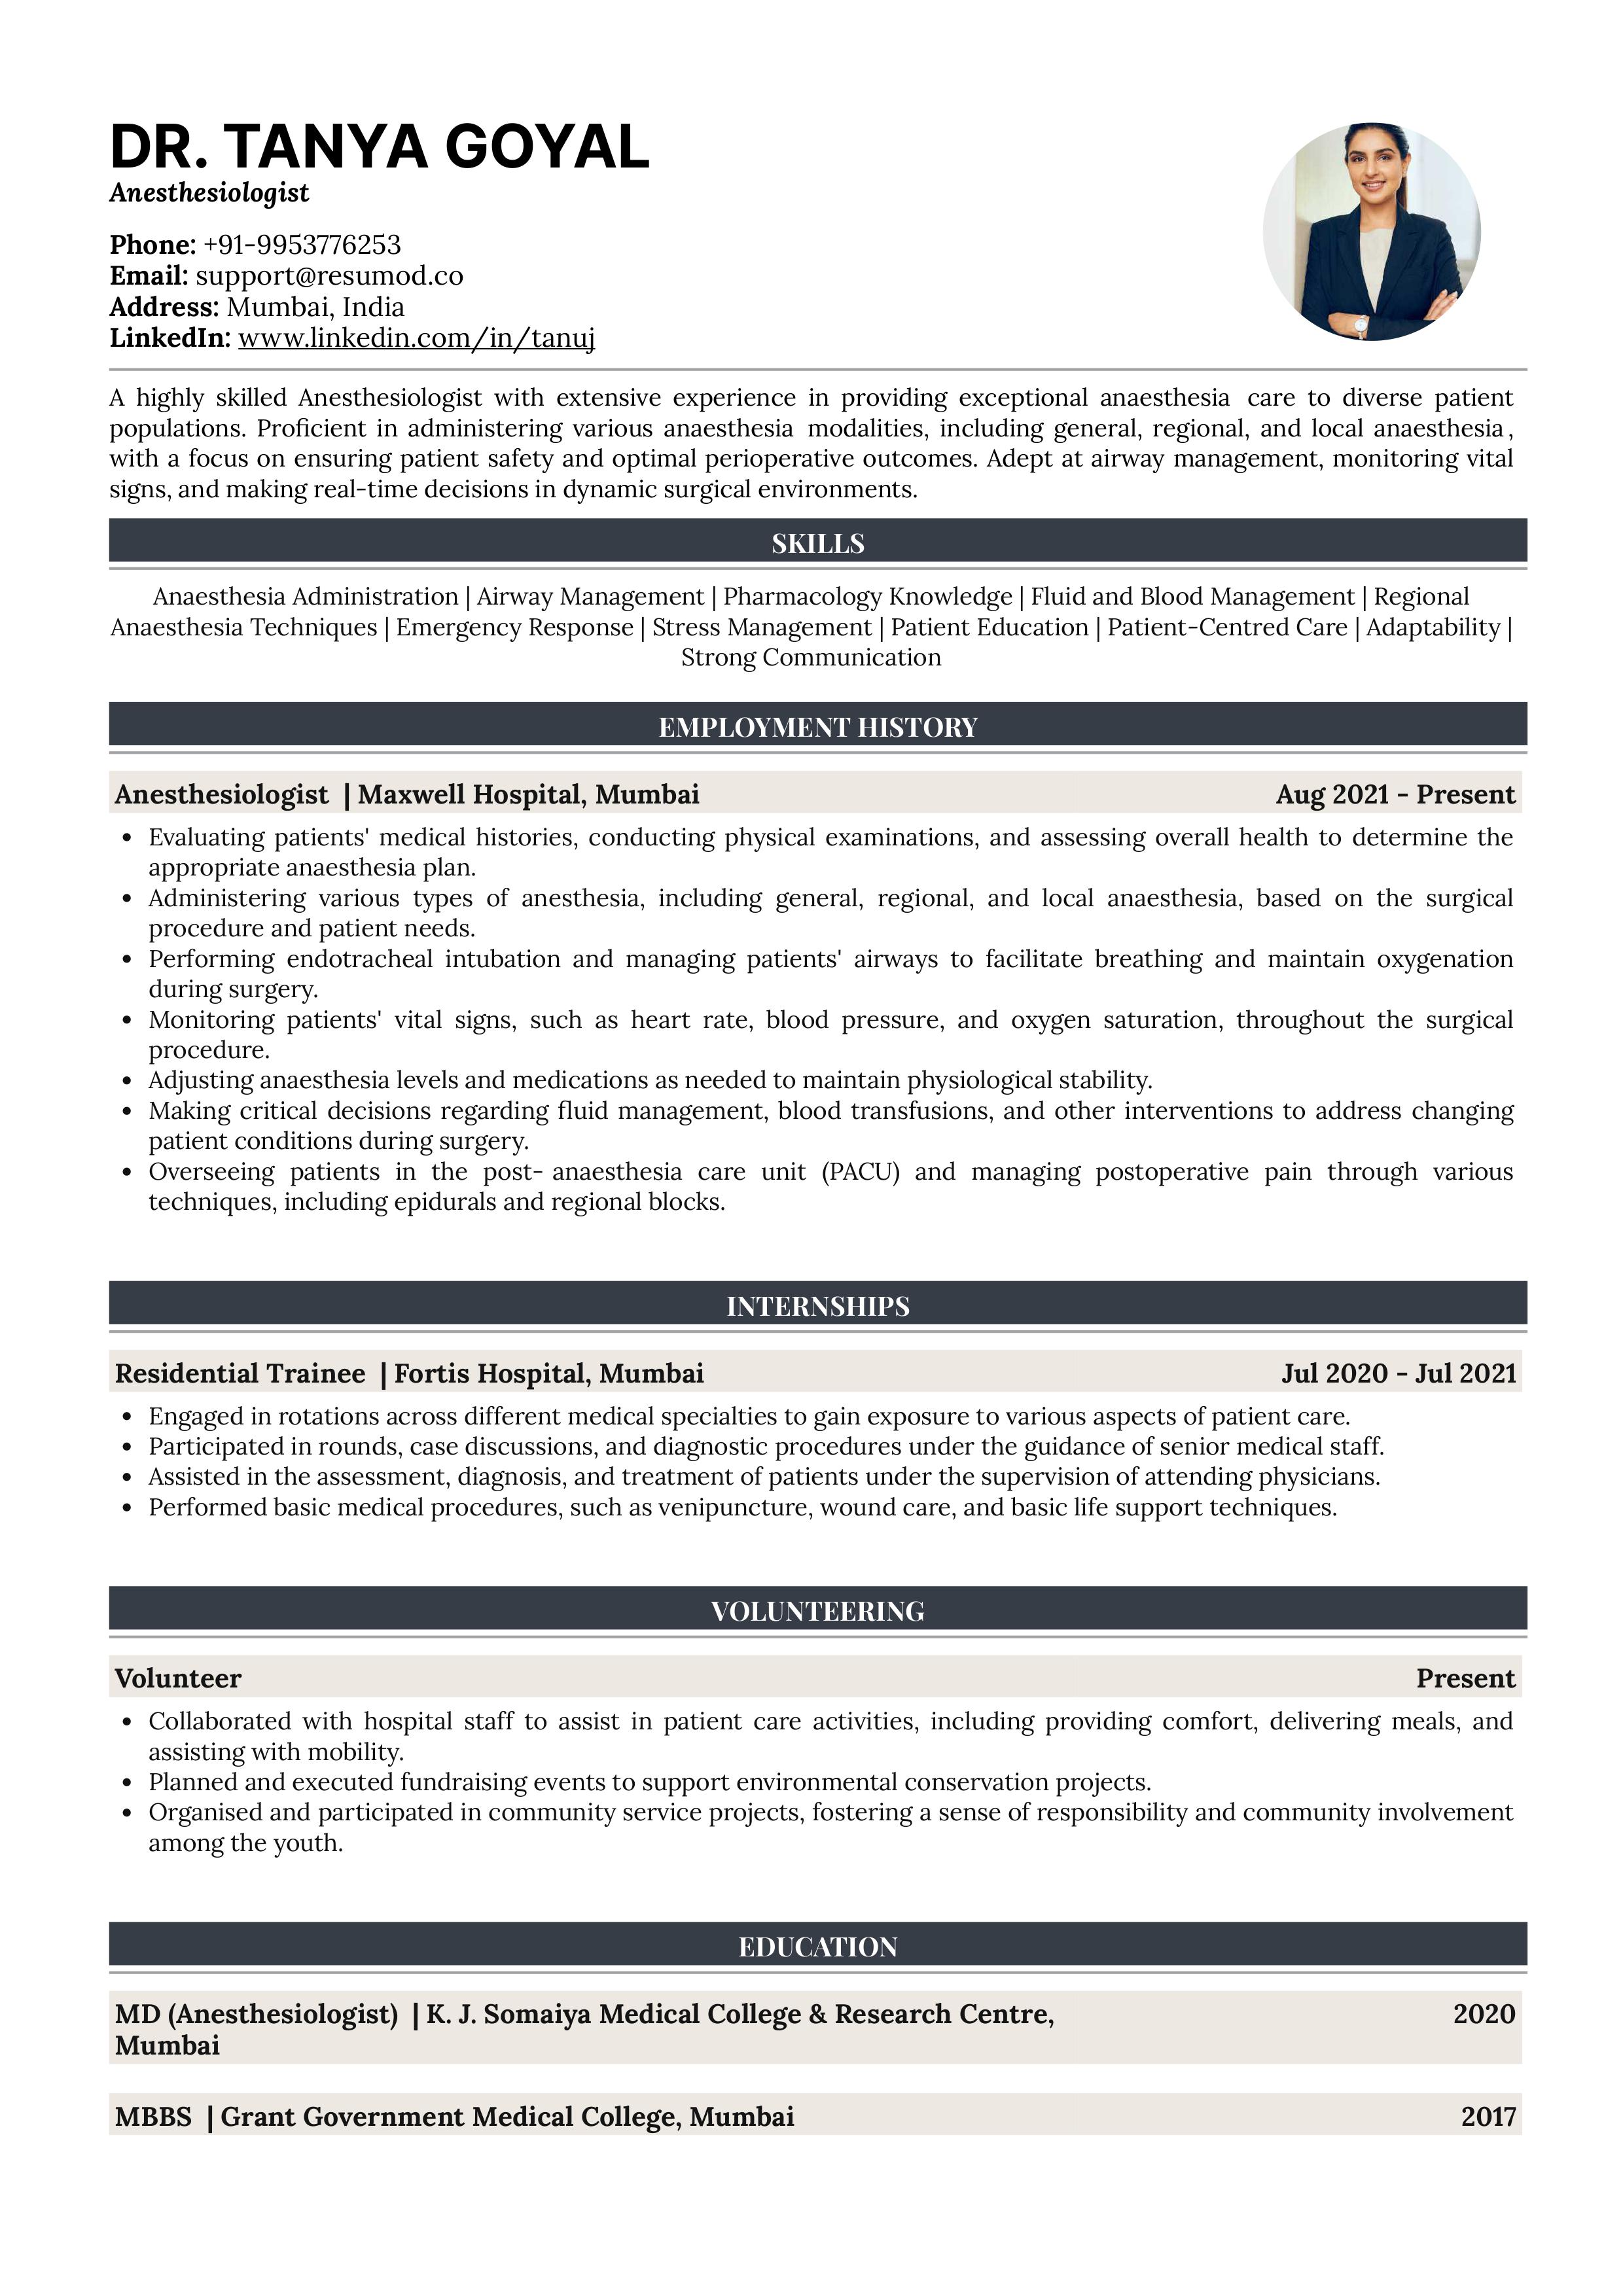 Sample Resume of Anesthesiologist | Free Resume Templates & Samples on Resumod.co